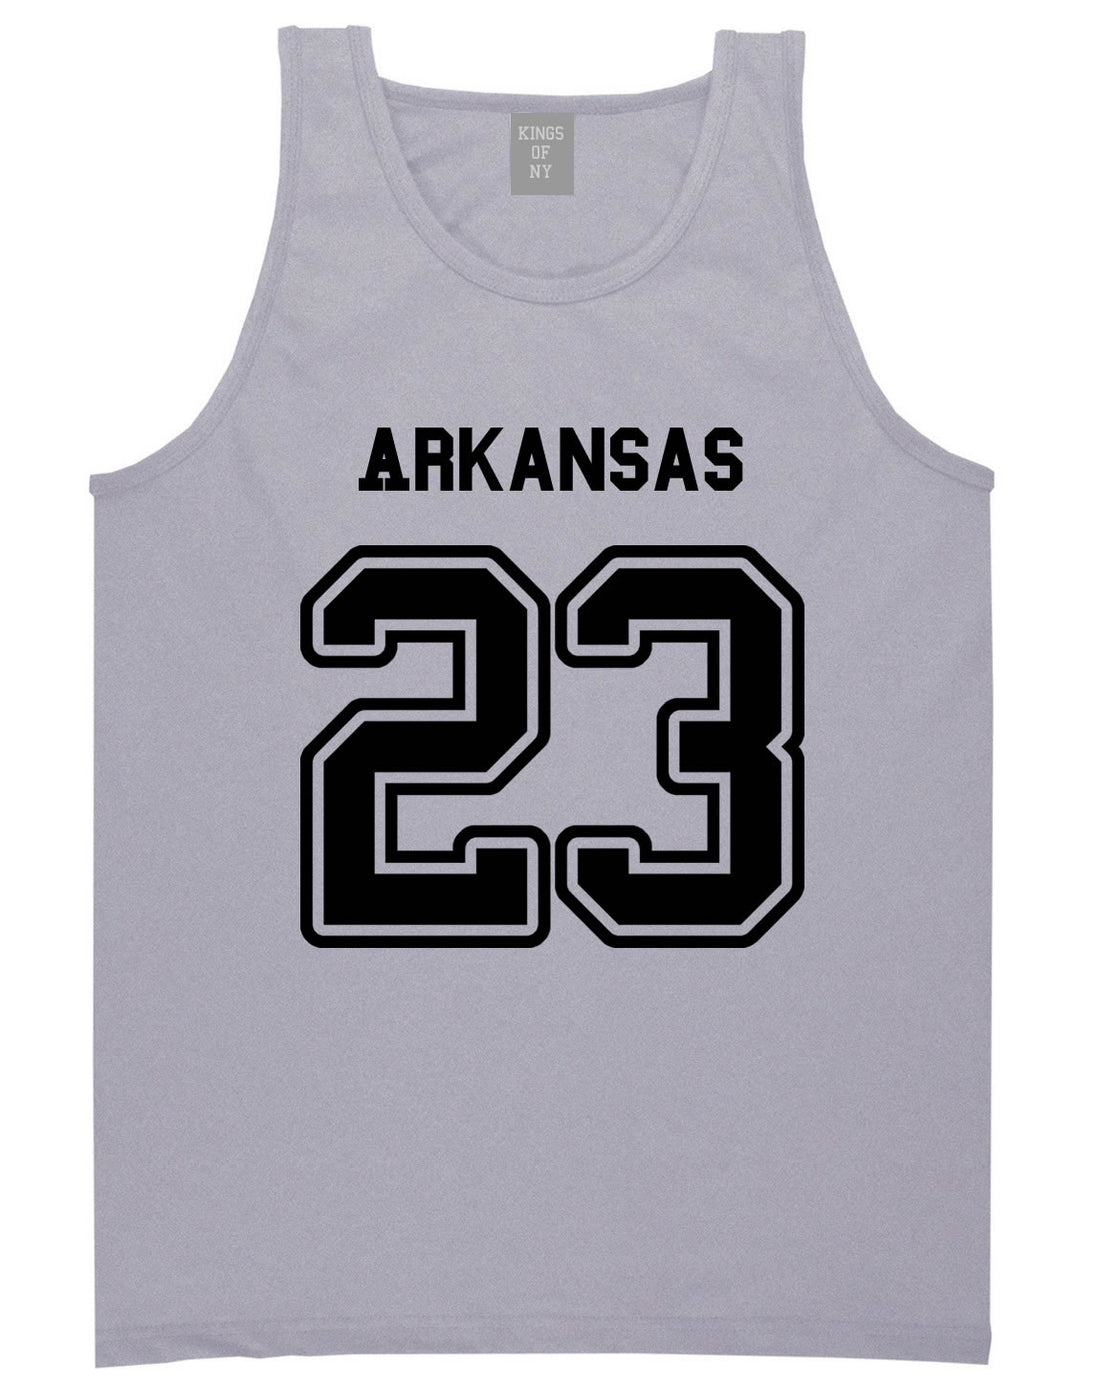 Sport Style Arkansas 23 Team State Jersey Mens Tank Top By Kings Of NY